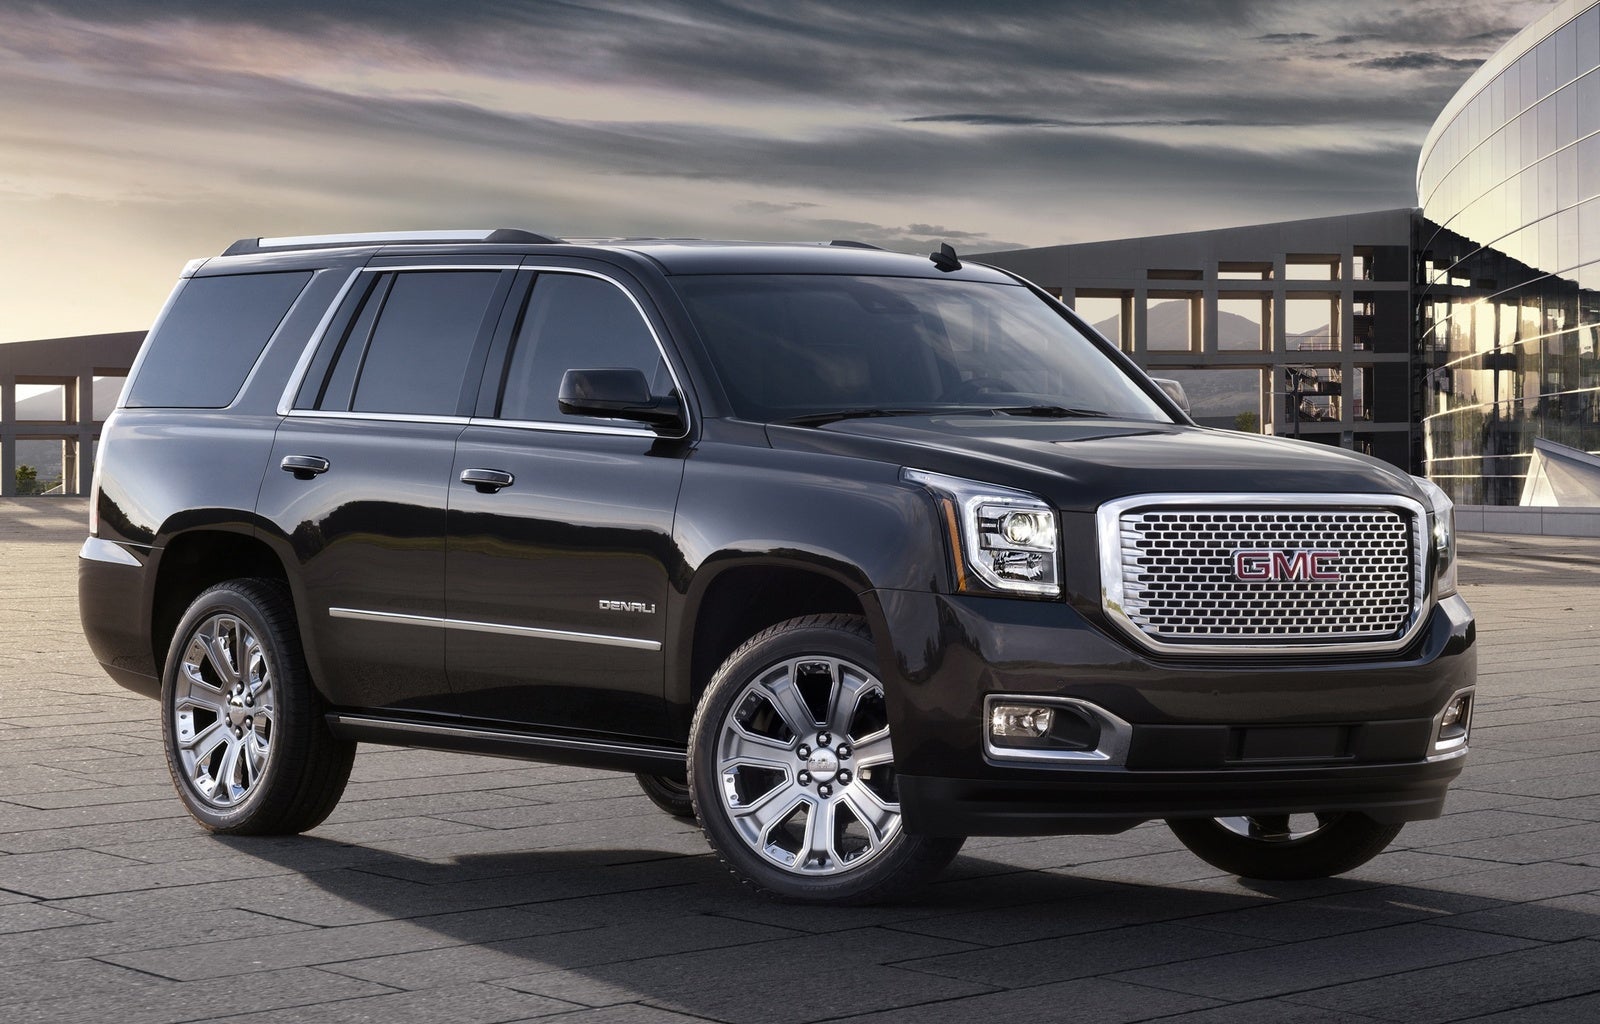 Compare gmc acadia and chevy tahoe #5